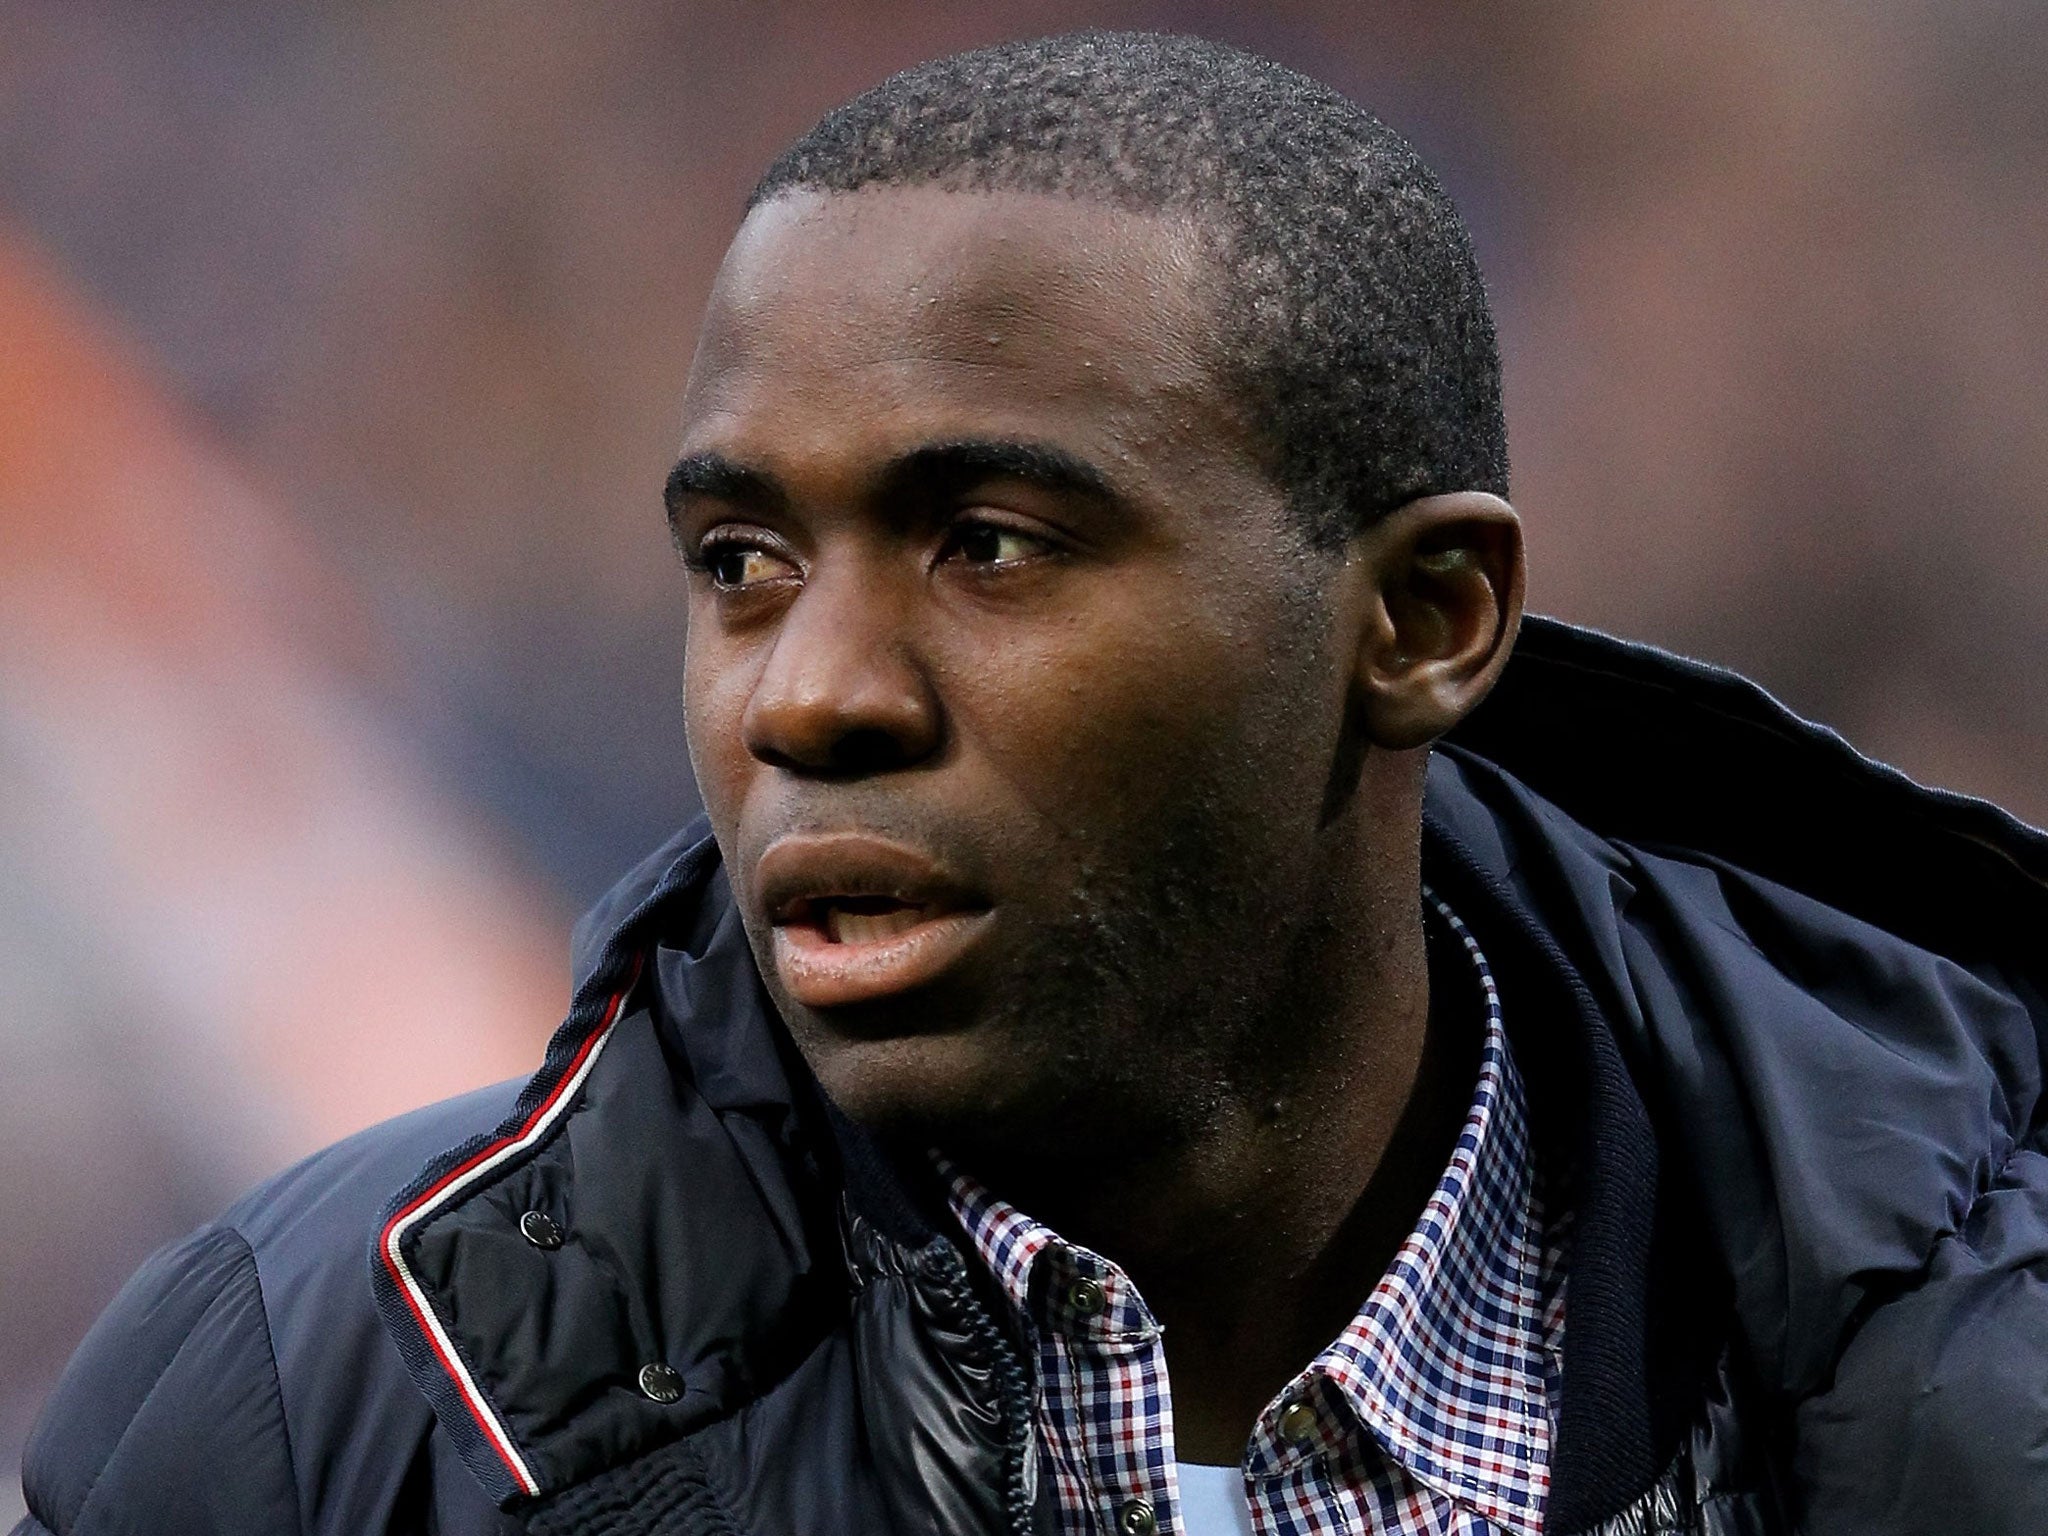 Fabrice Muamba’s heart stopped for 78 minutes during a game